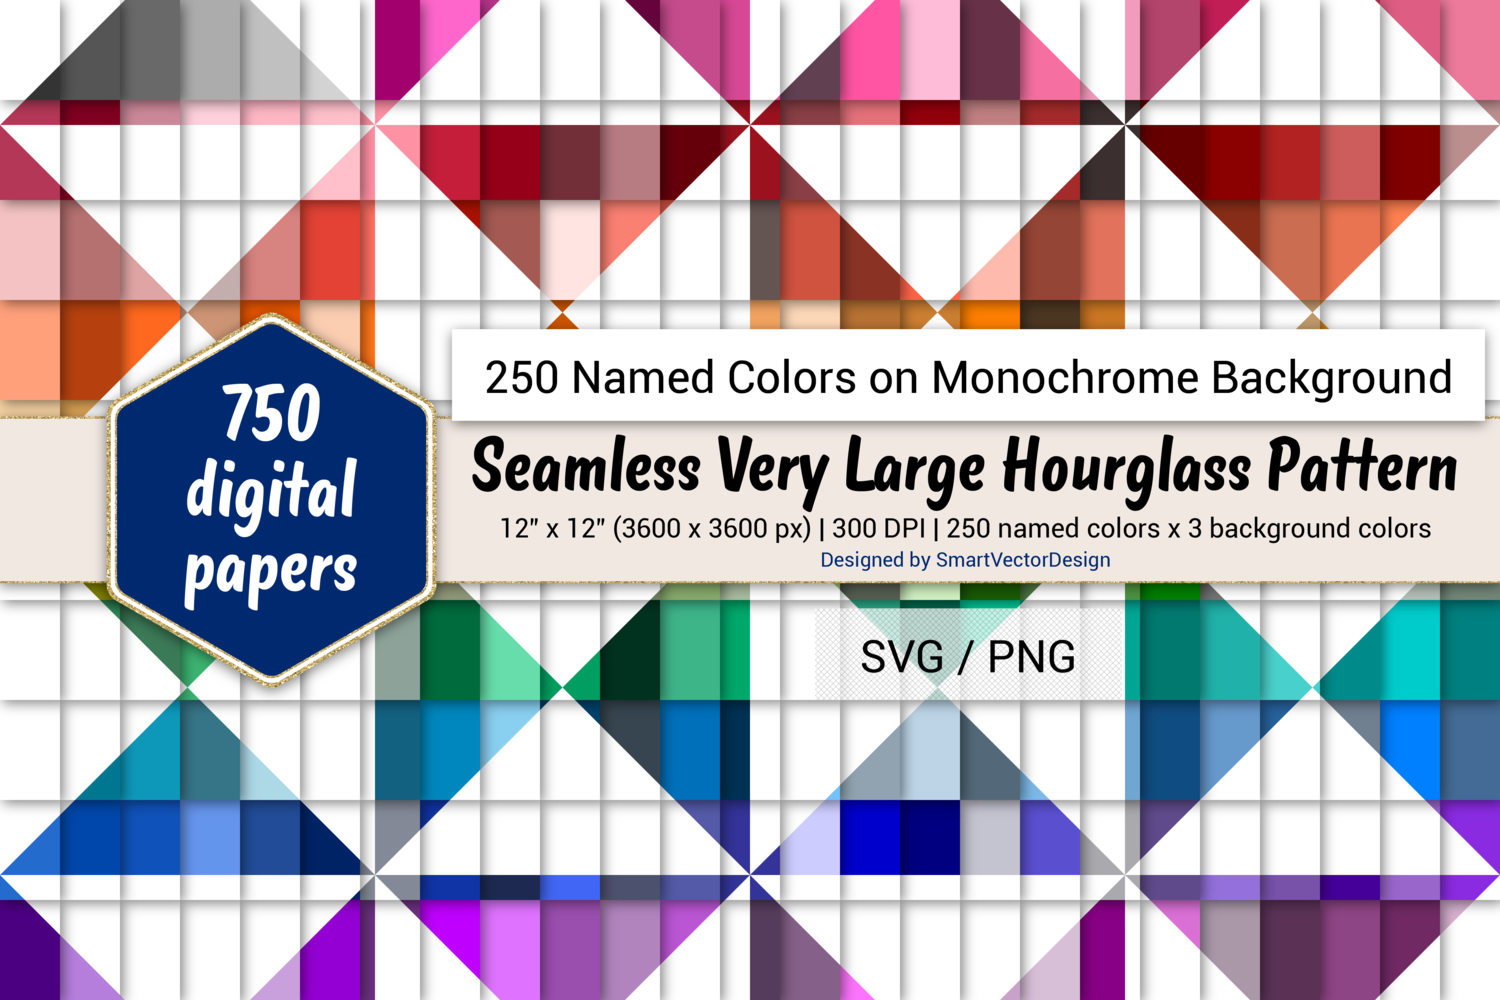 Seamless Very Large Hourglass Pattern Paper-250 Colors on BG By  SmartVectorDesign